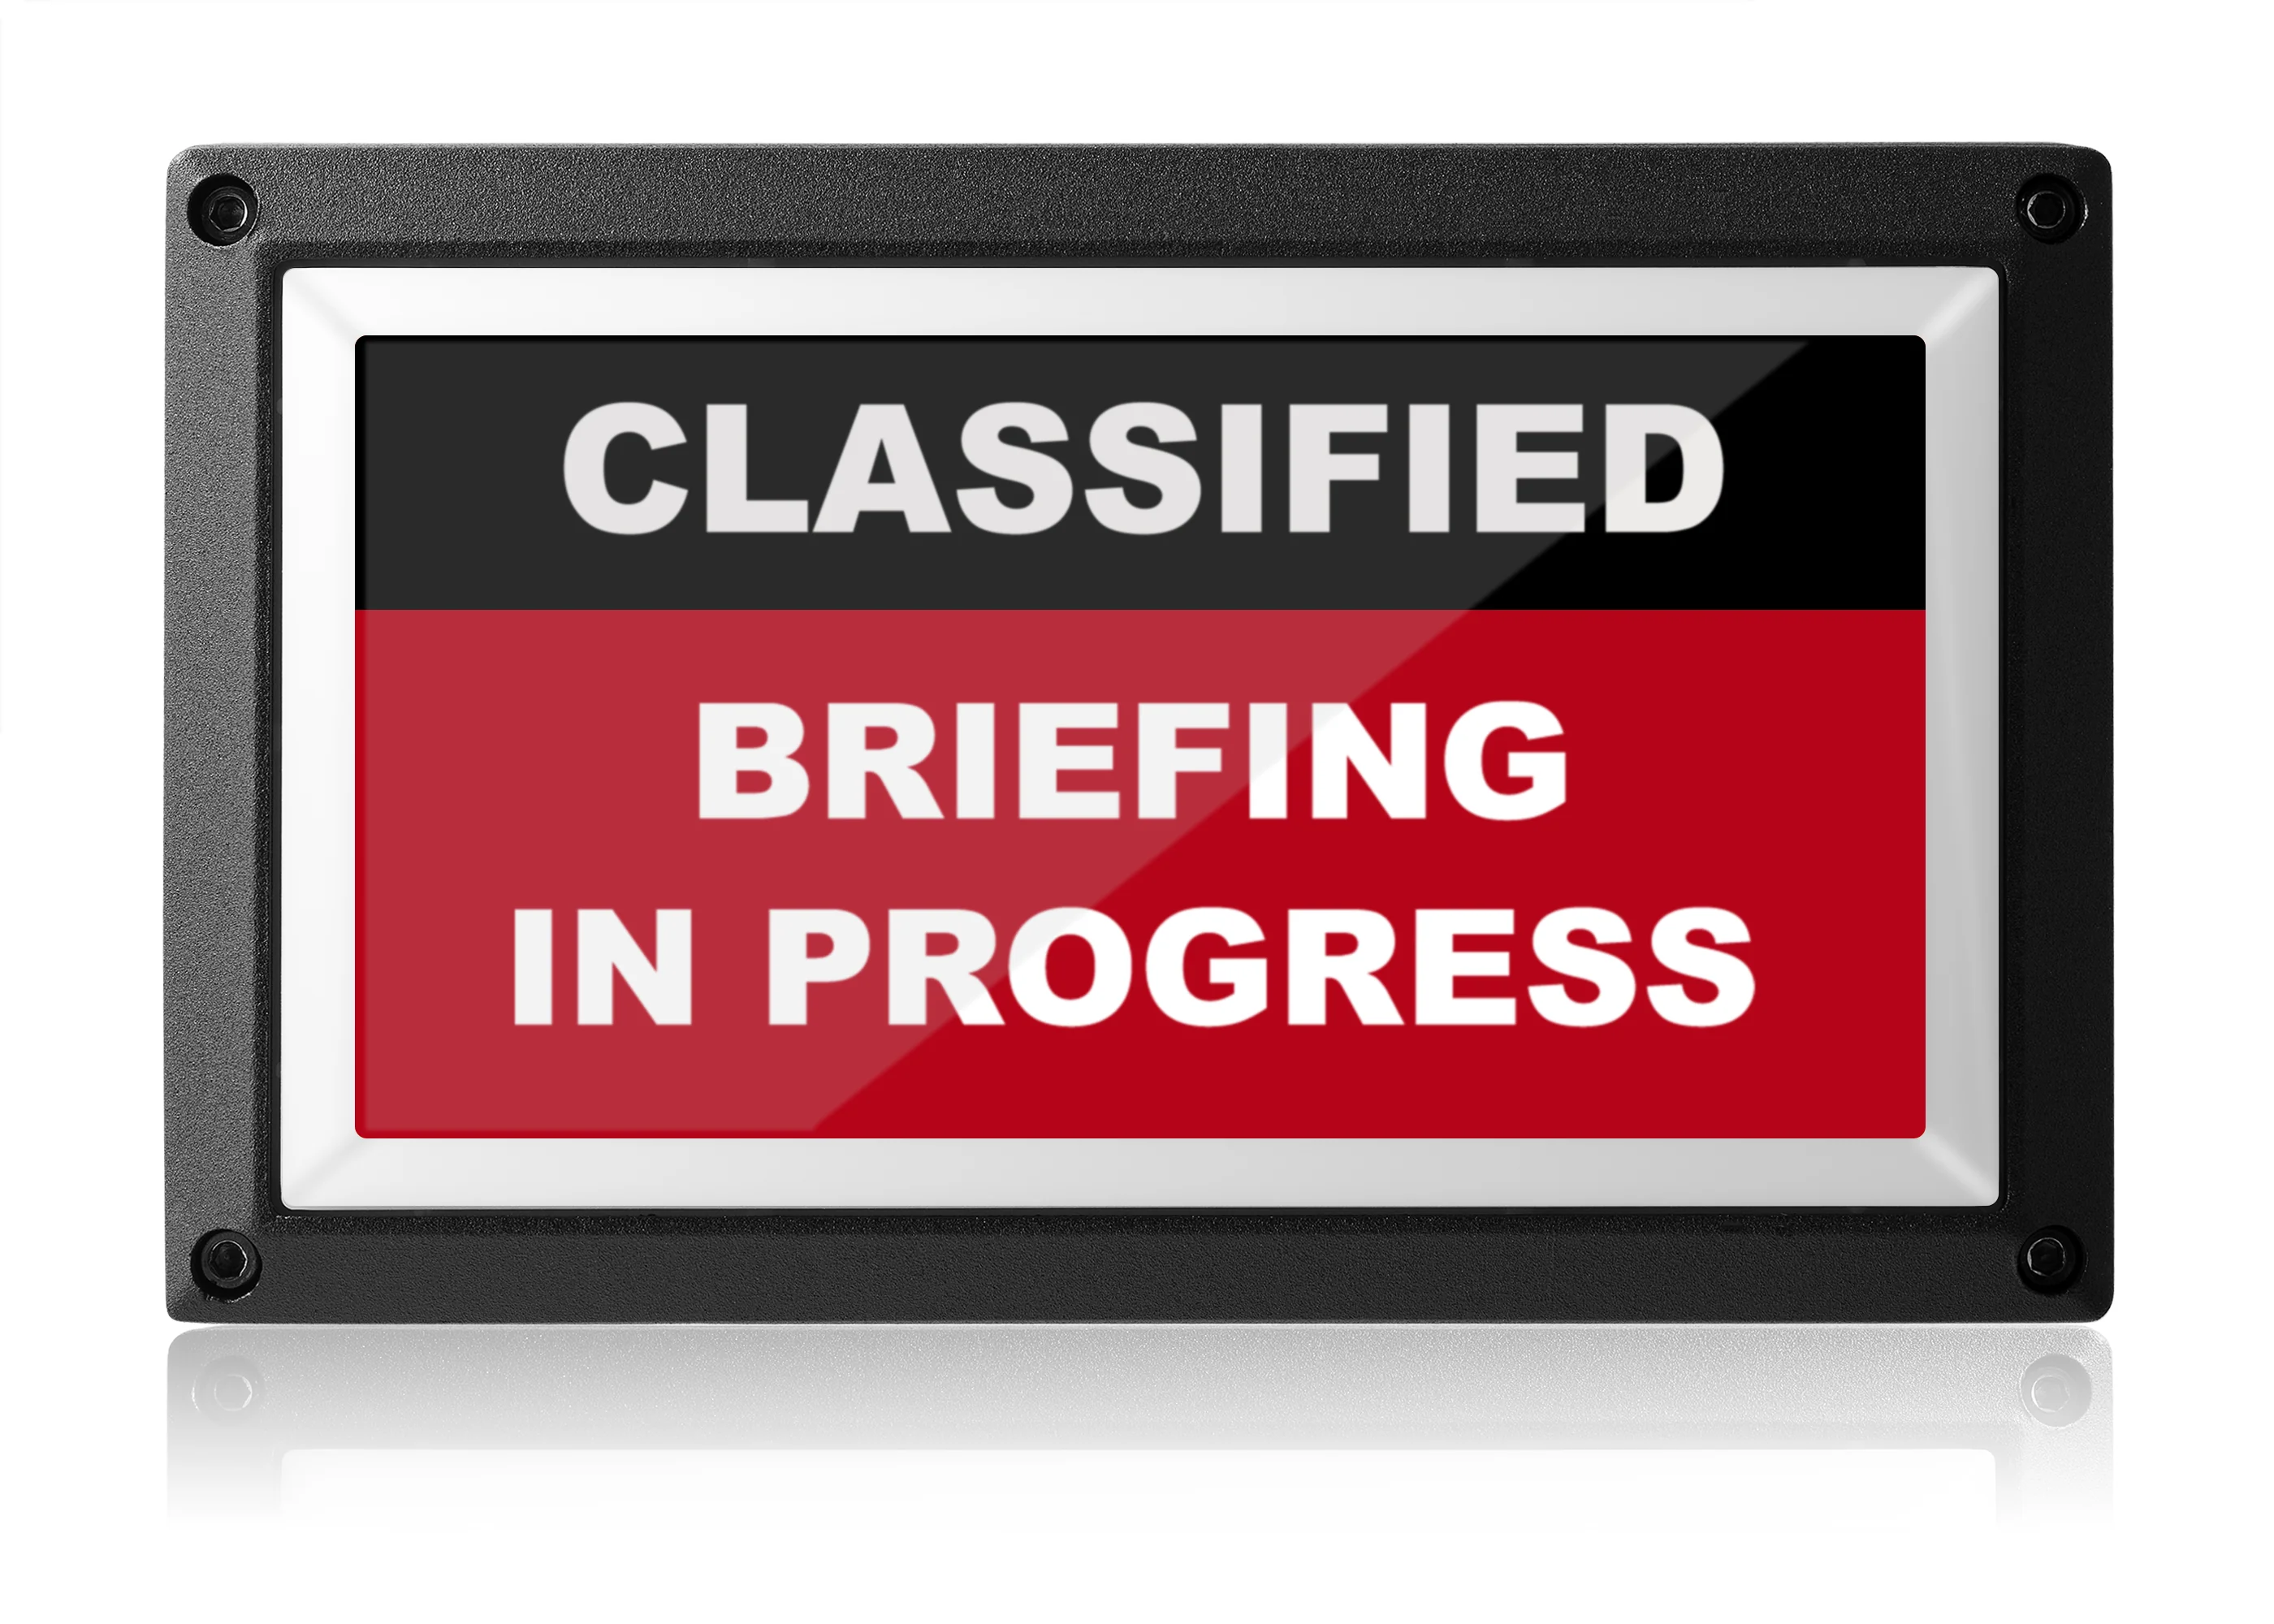 Battery Powered Classified Briefing In Progress Sign - USAF AFMC Spec - Rekall Dynamics